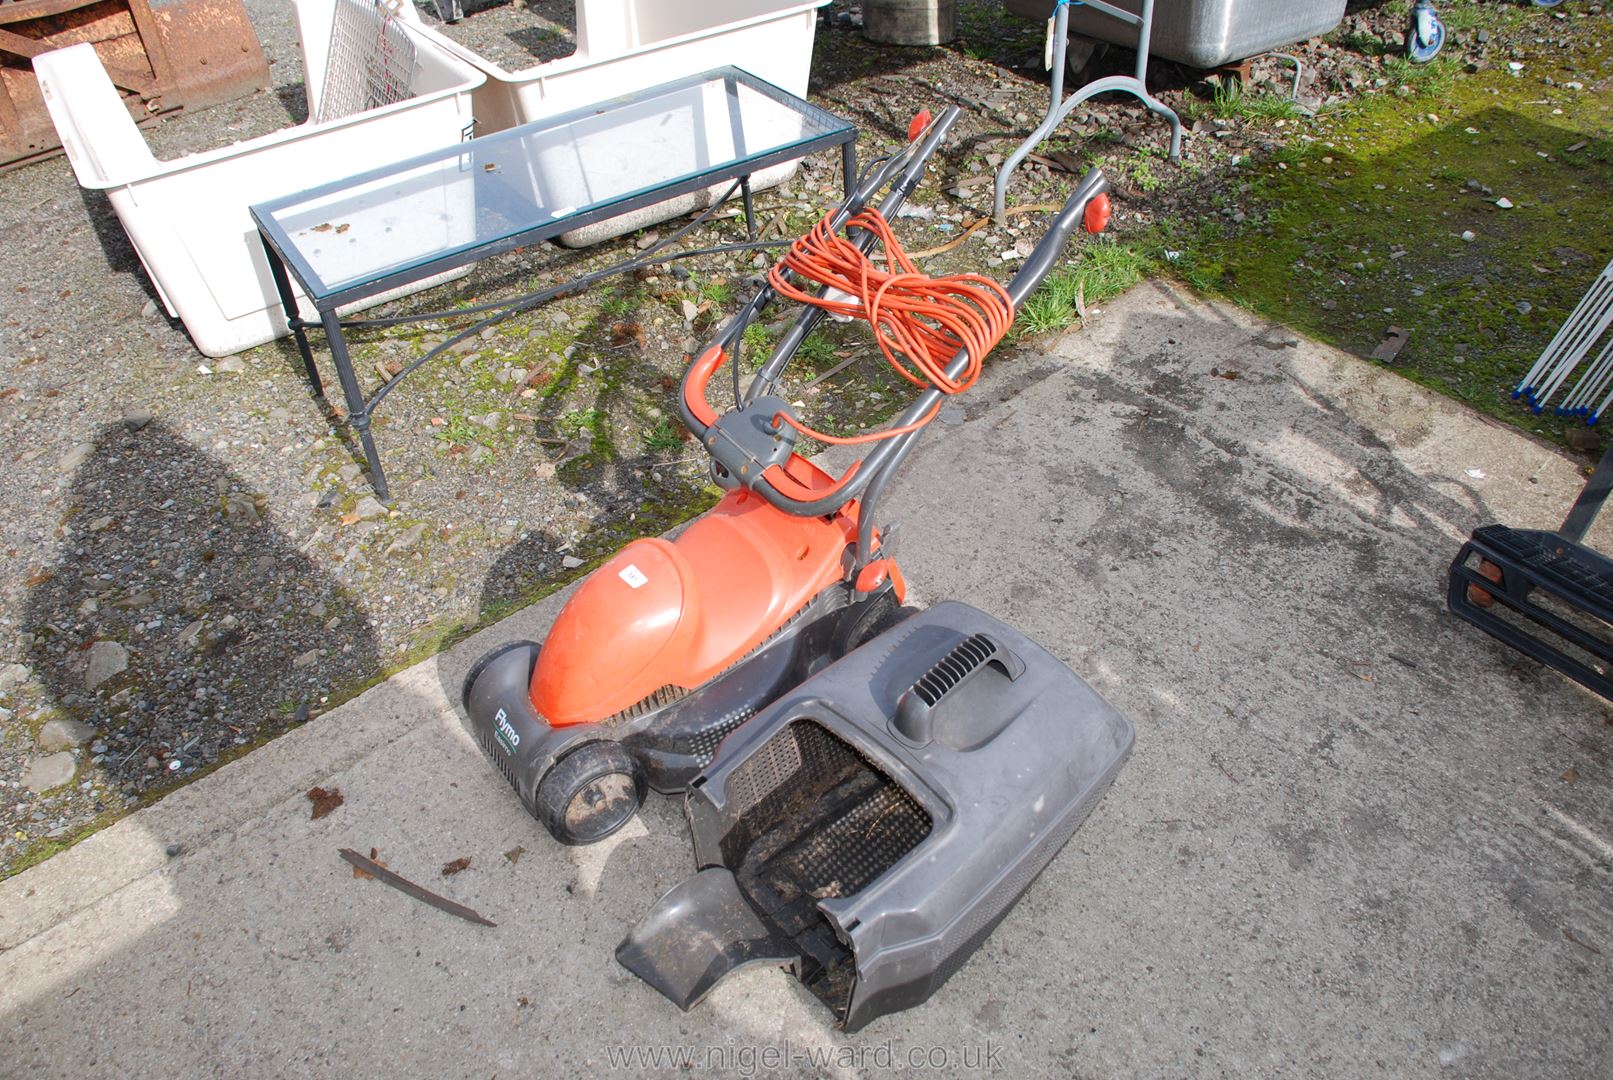 Small electric Flymo Easimo lawn mower and box